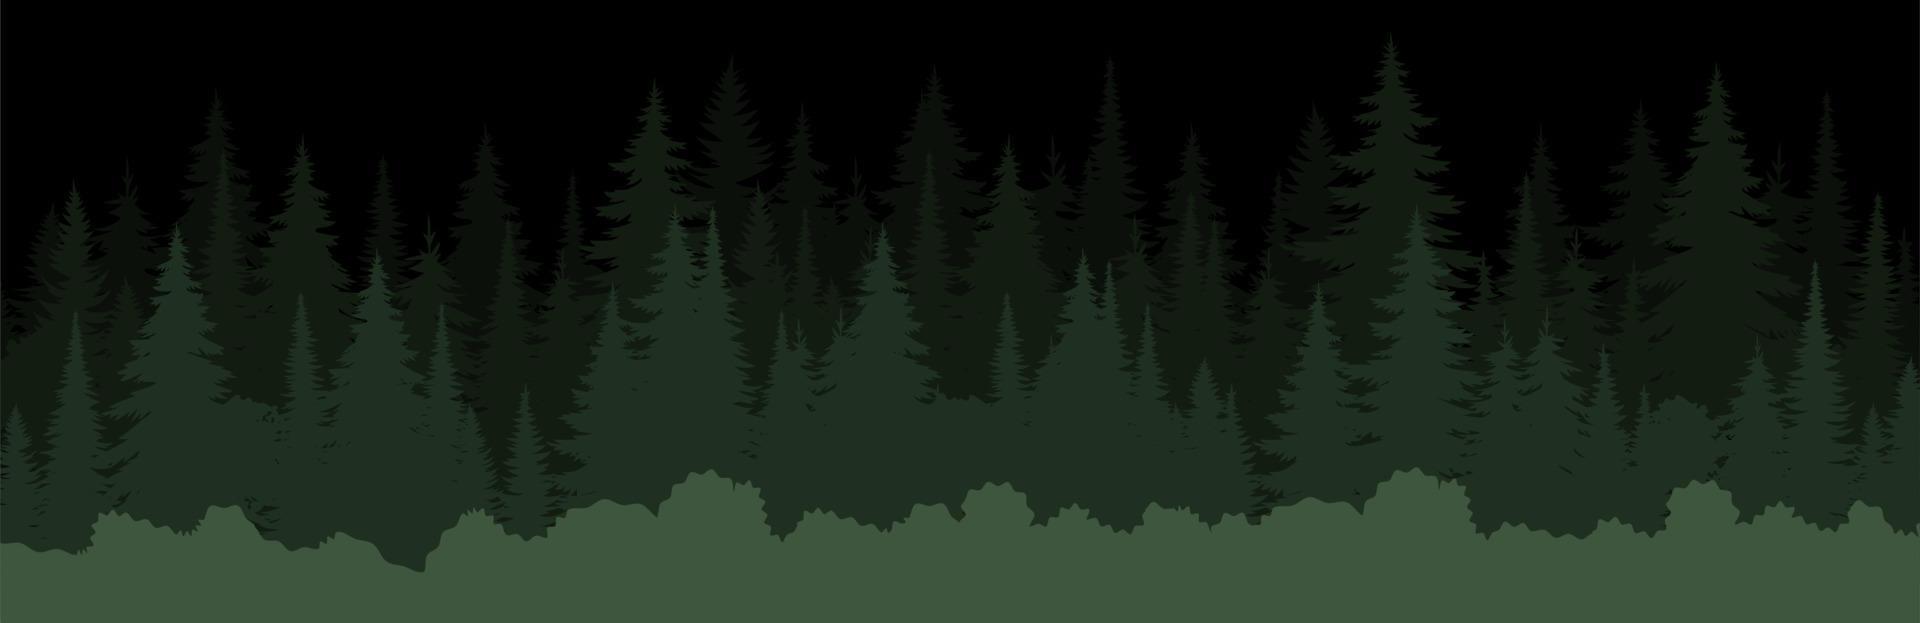 Vector mountains forest background texture, silhouette of coniferous forest, vector. Night trees, spruce, fir. Horizontal landscape layered.